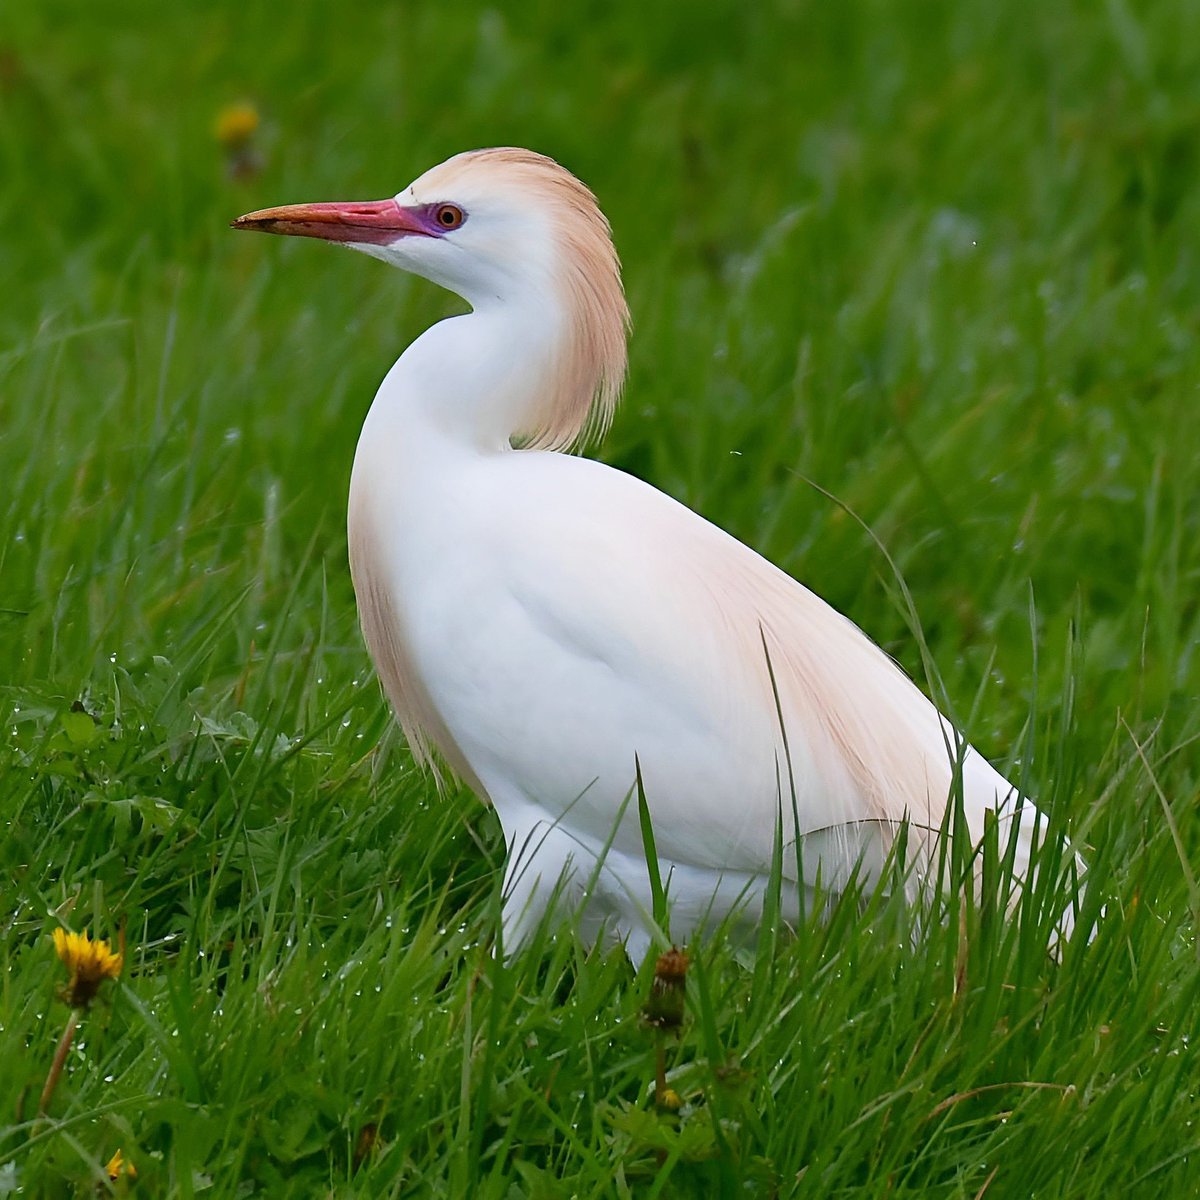 Cattle Egret in full breeding plumage, today on the Somerset Levels